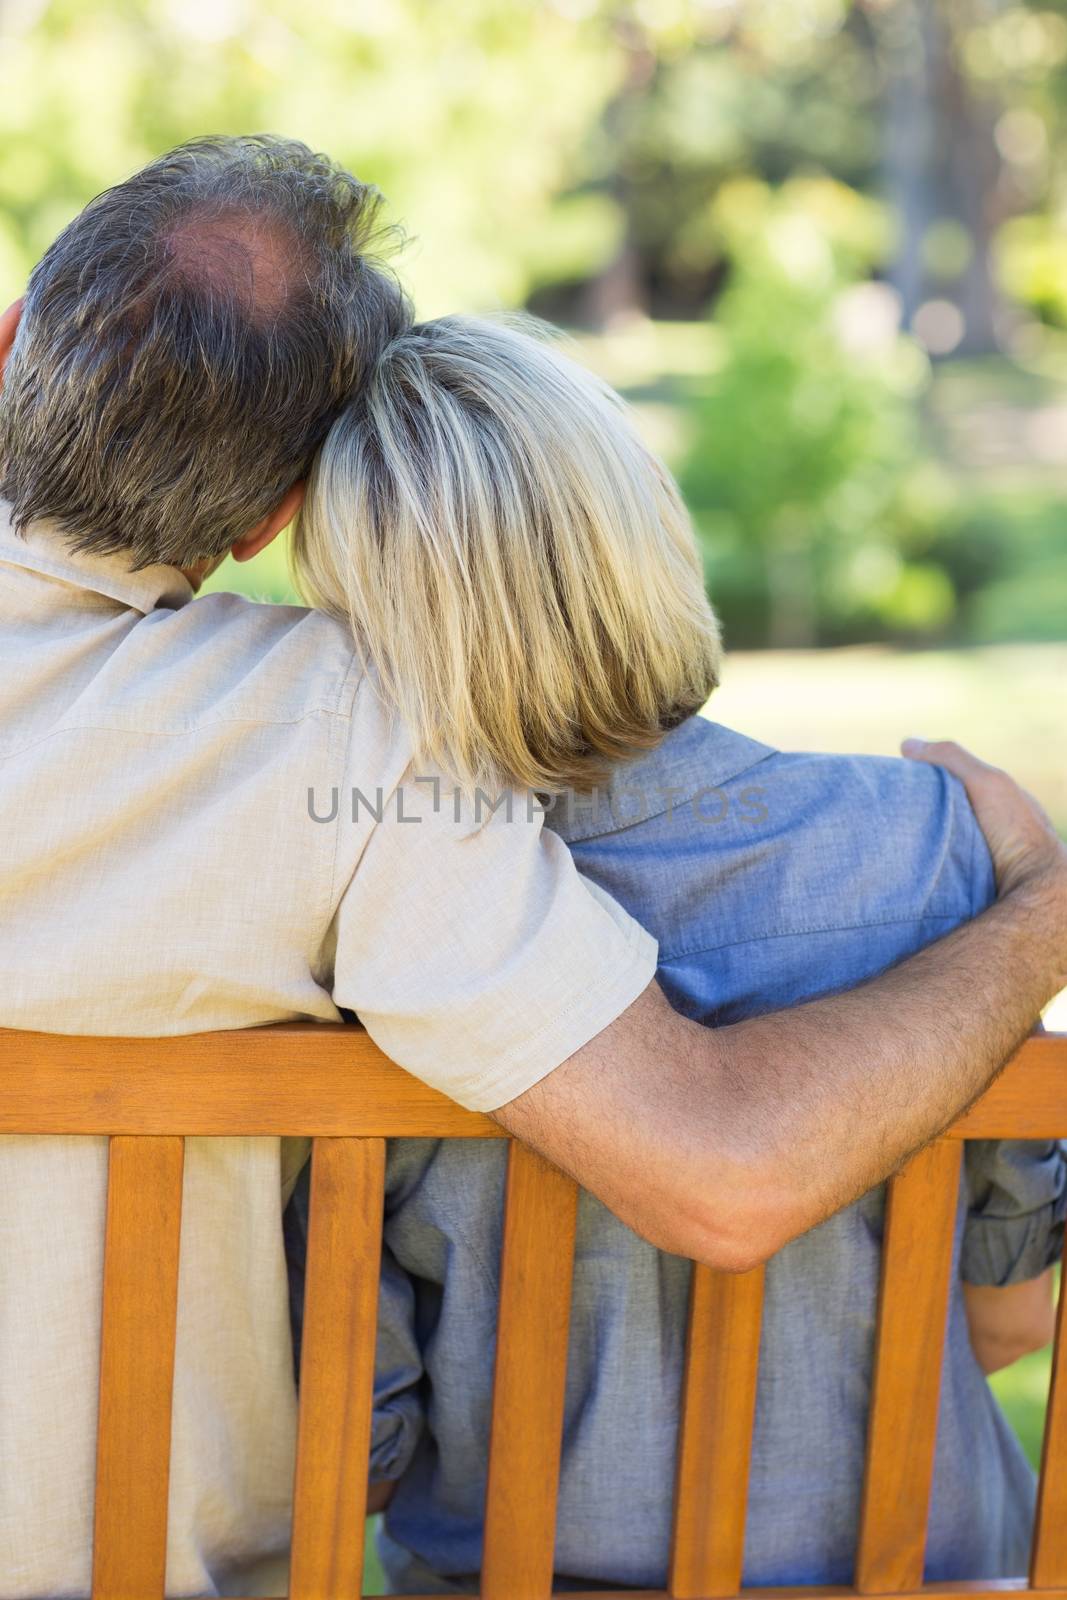 Rear view of affectionate couple relaxing on bench in park